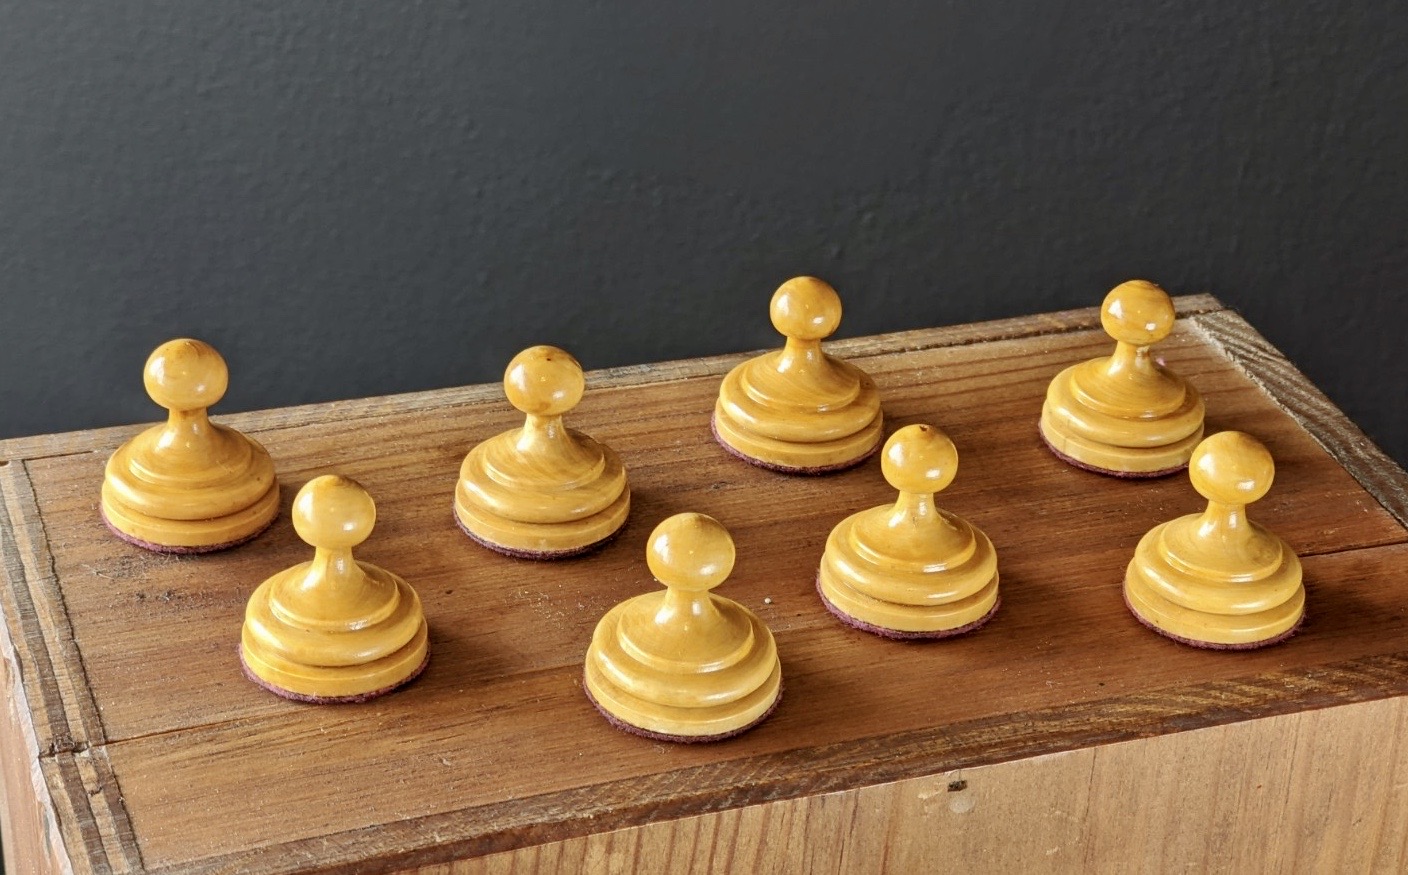 Reproduced Vintage 1930 German Knubbel Analysis Chess Pieces 